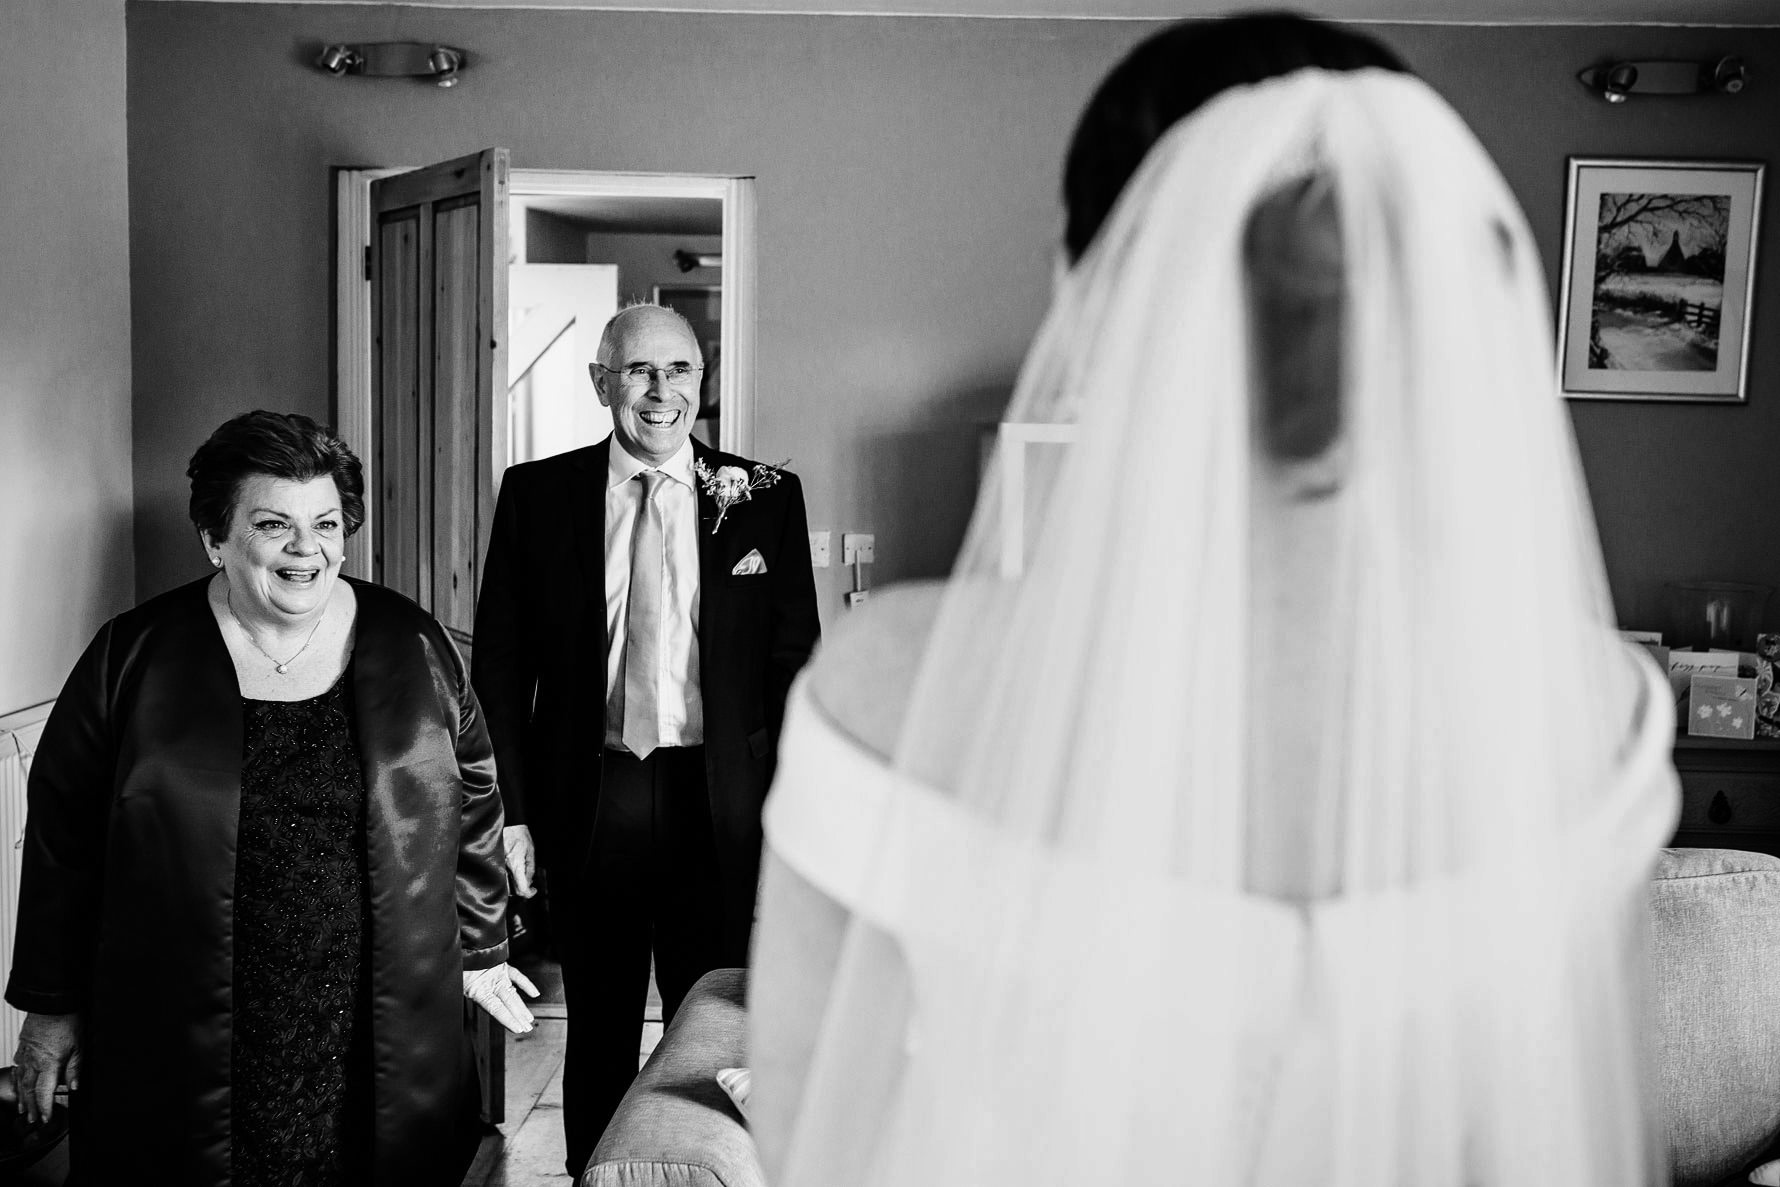 hothorpe hall woodlands wedding photography by Elliot W Patching